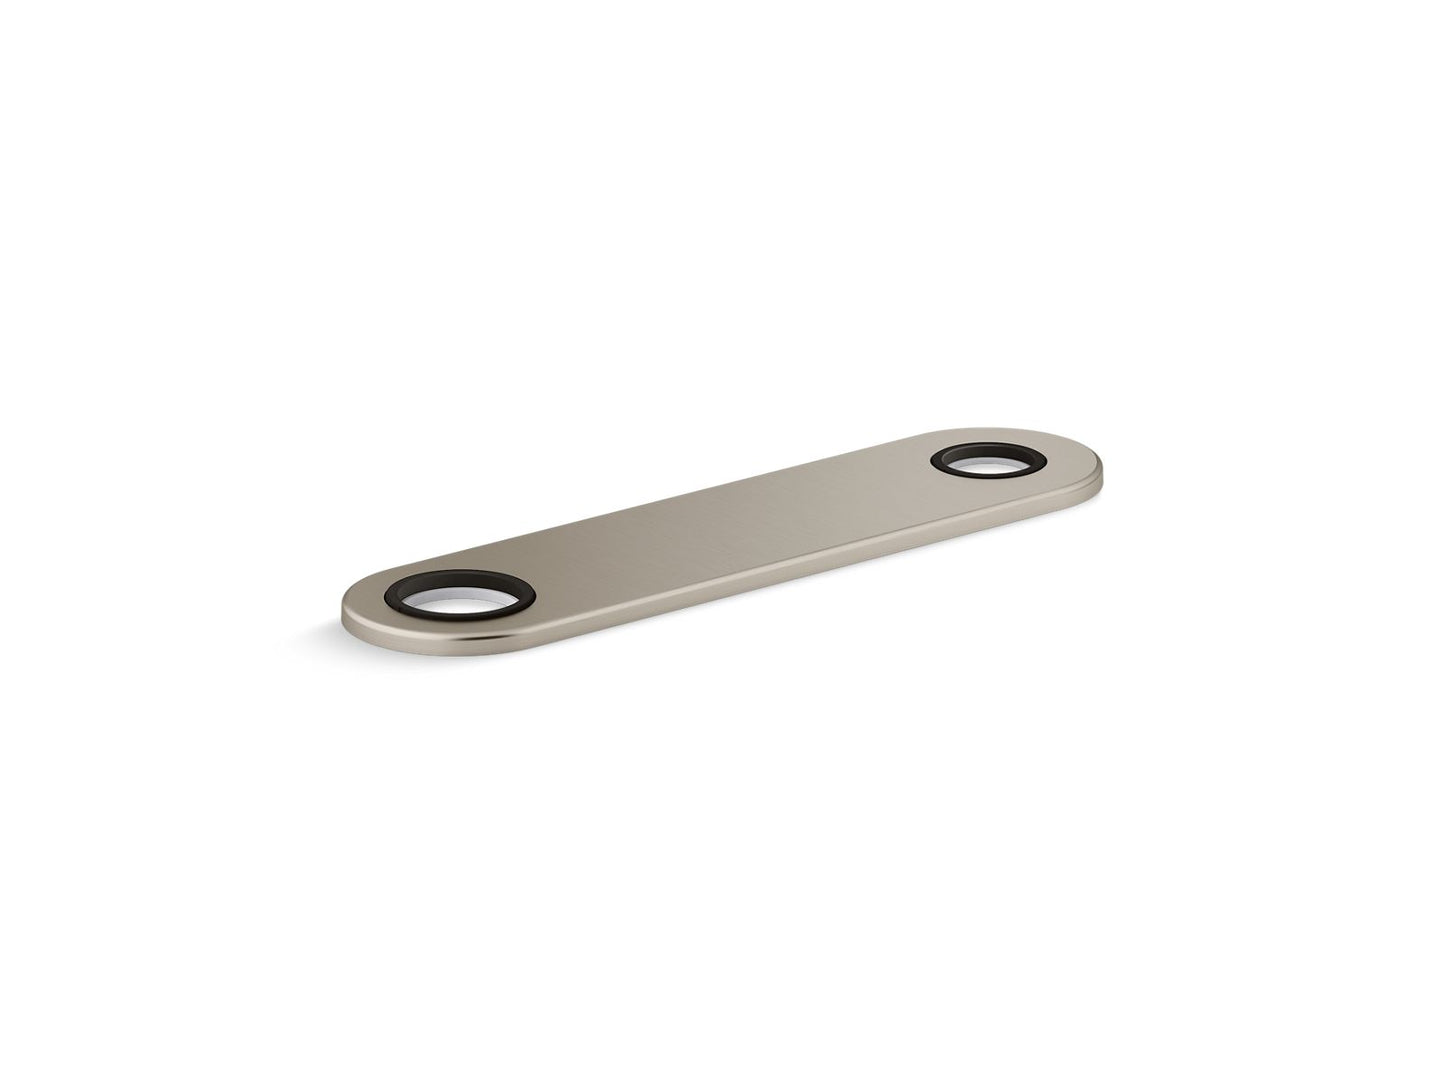 KOHLER K-38168-BN 8" Two-Hole Escutcheon Plate For Insight And Kinesis Lavatory Faucets And Soap Dispensers In Vibrant Brushed Nickel